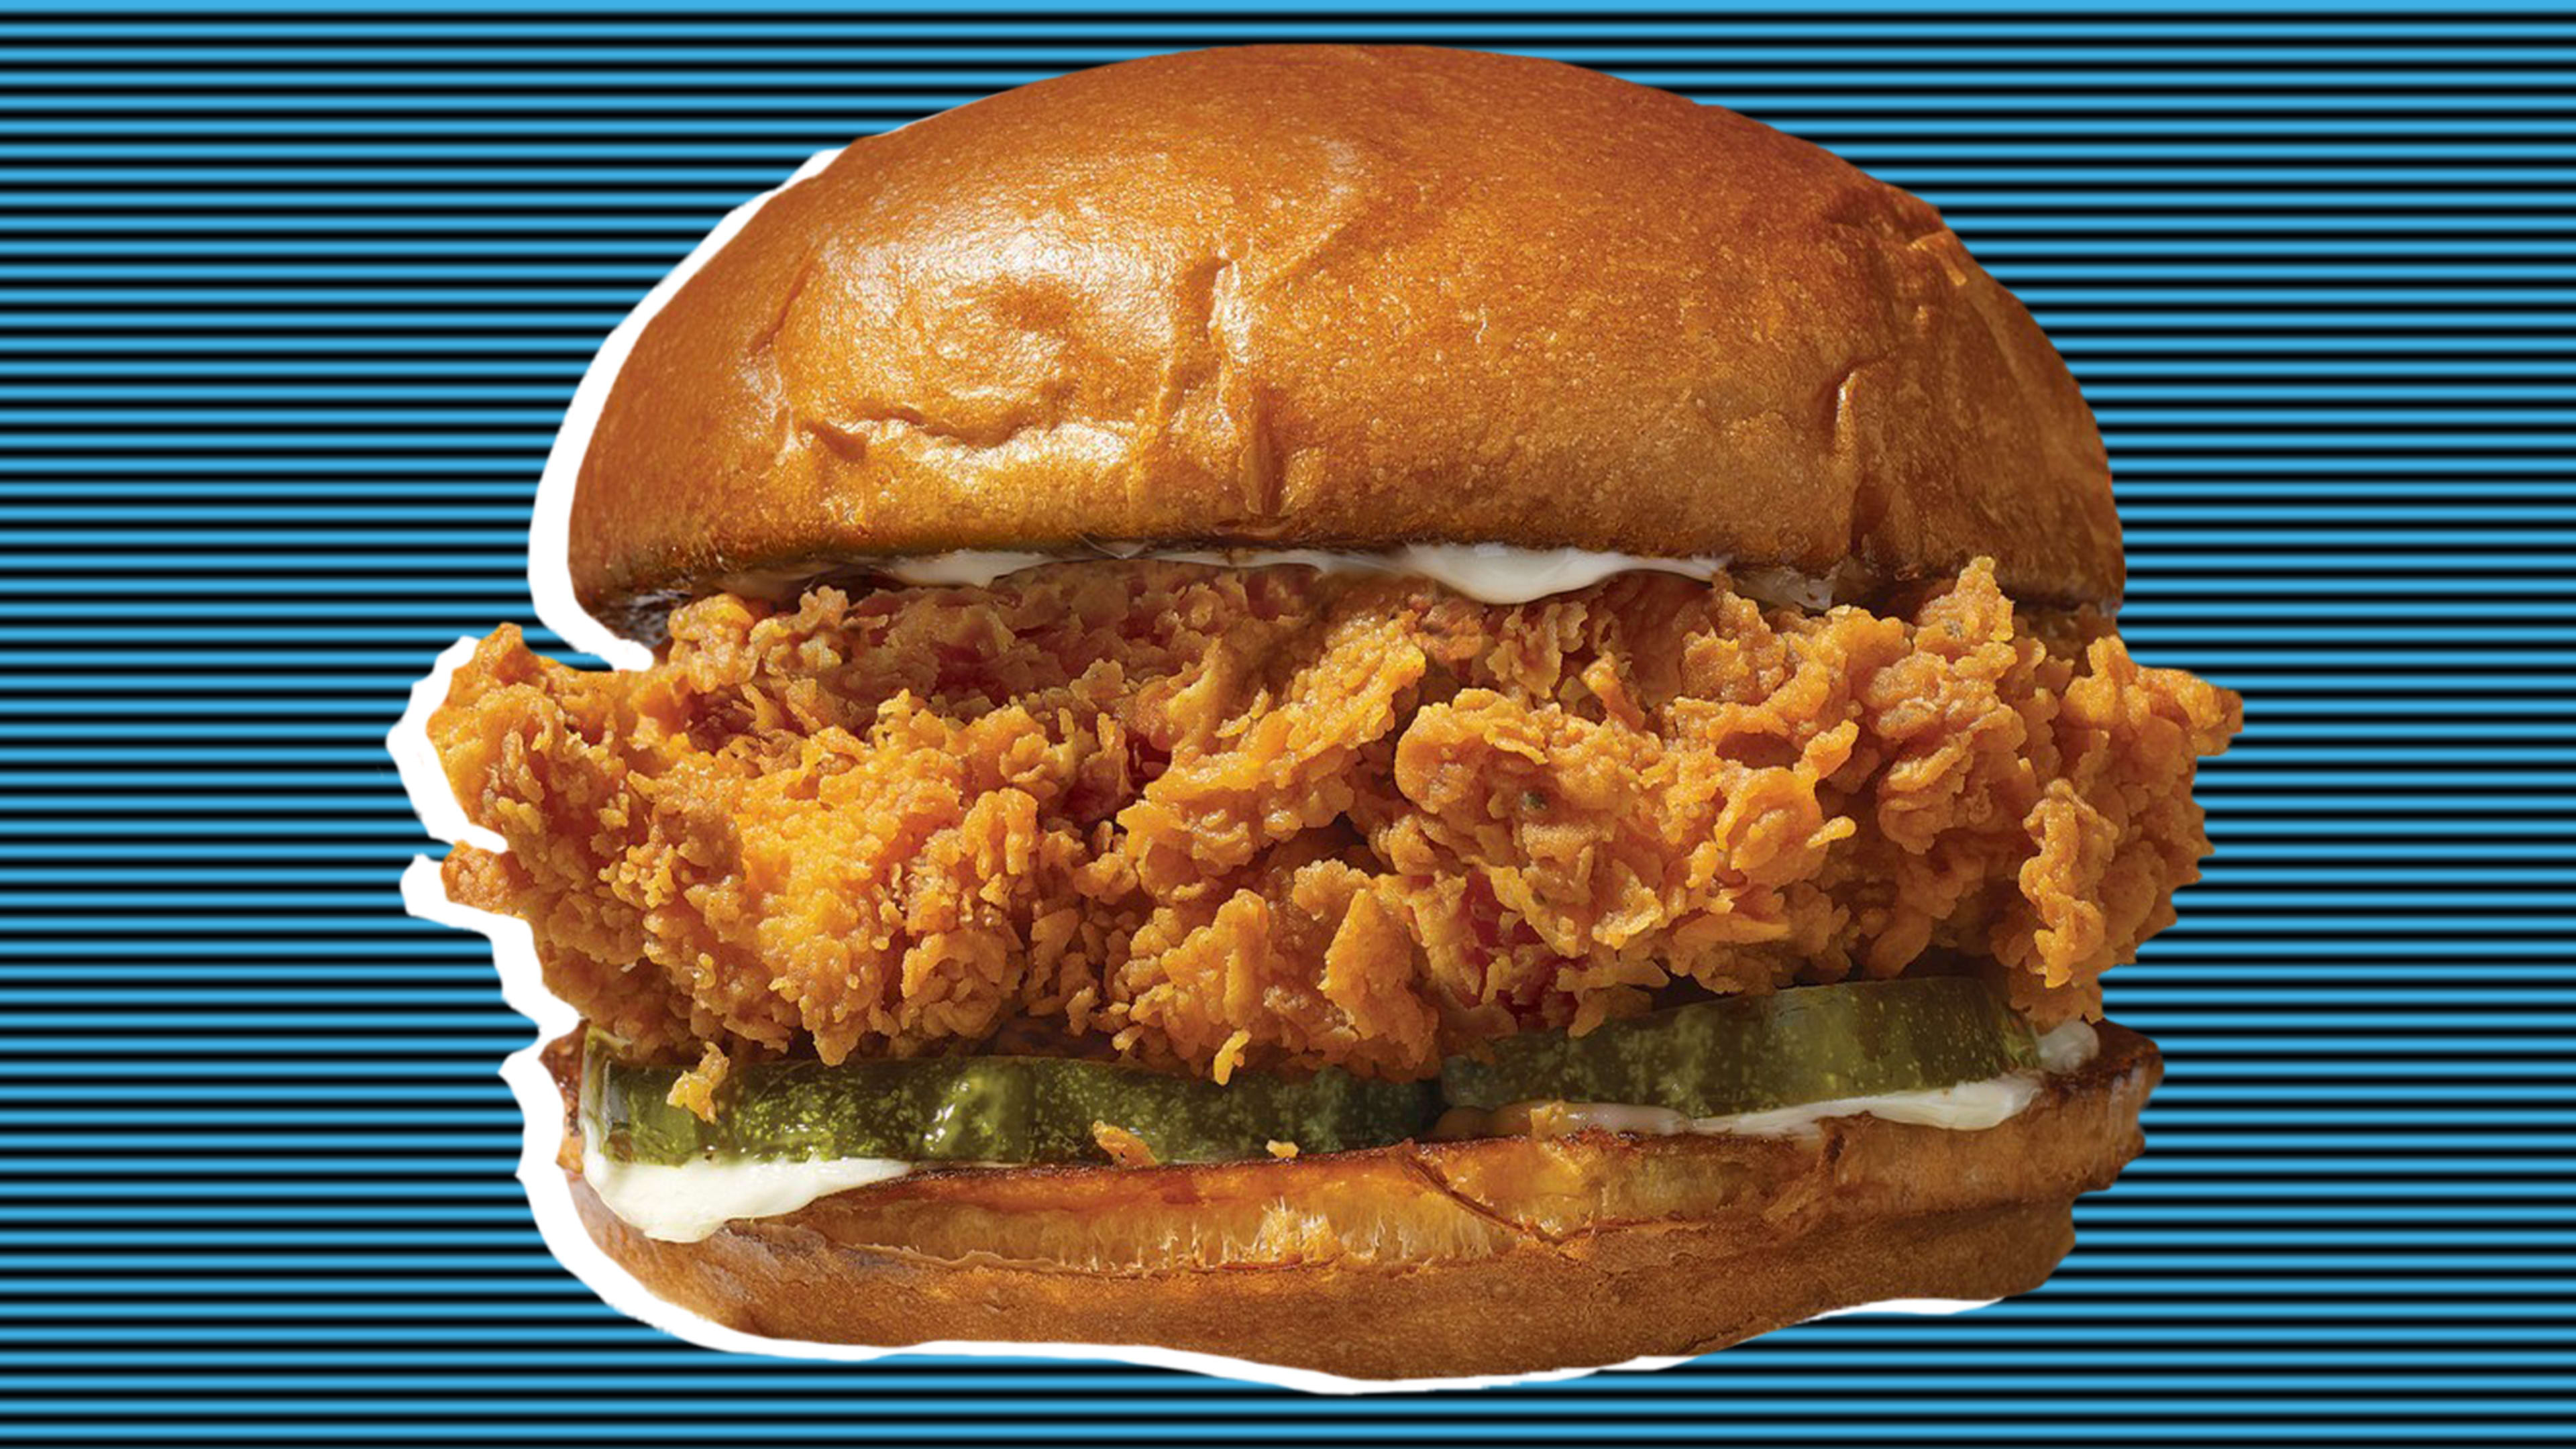 Who bought the Popeyes chicken sandwich? Wealthy Gen-Xers who live alone